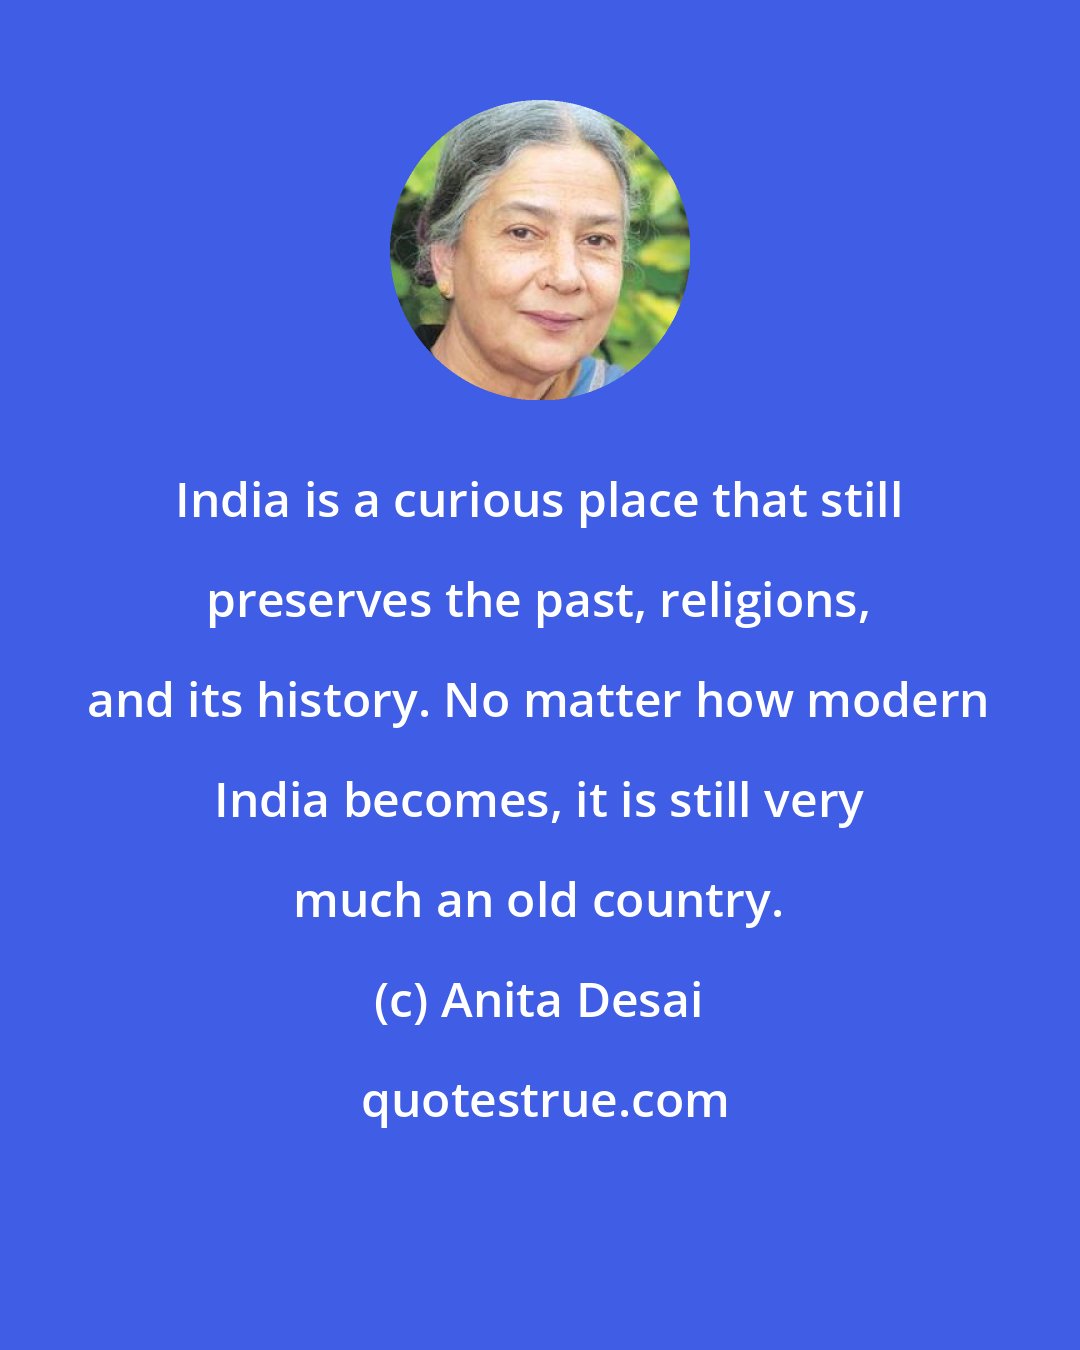 Anita Desai: India is a curious place that still preserves the past, religions, and its history. No matter how modern India becomes, it is still very much an old country.